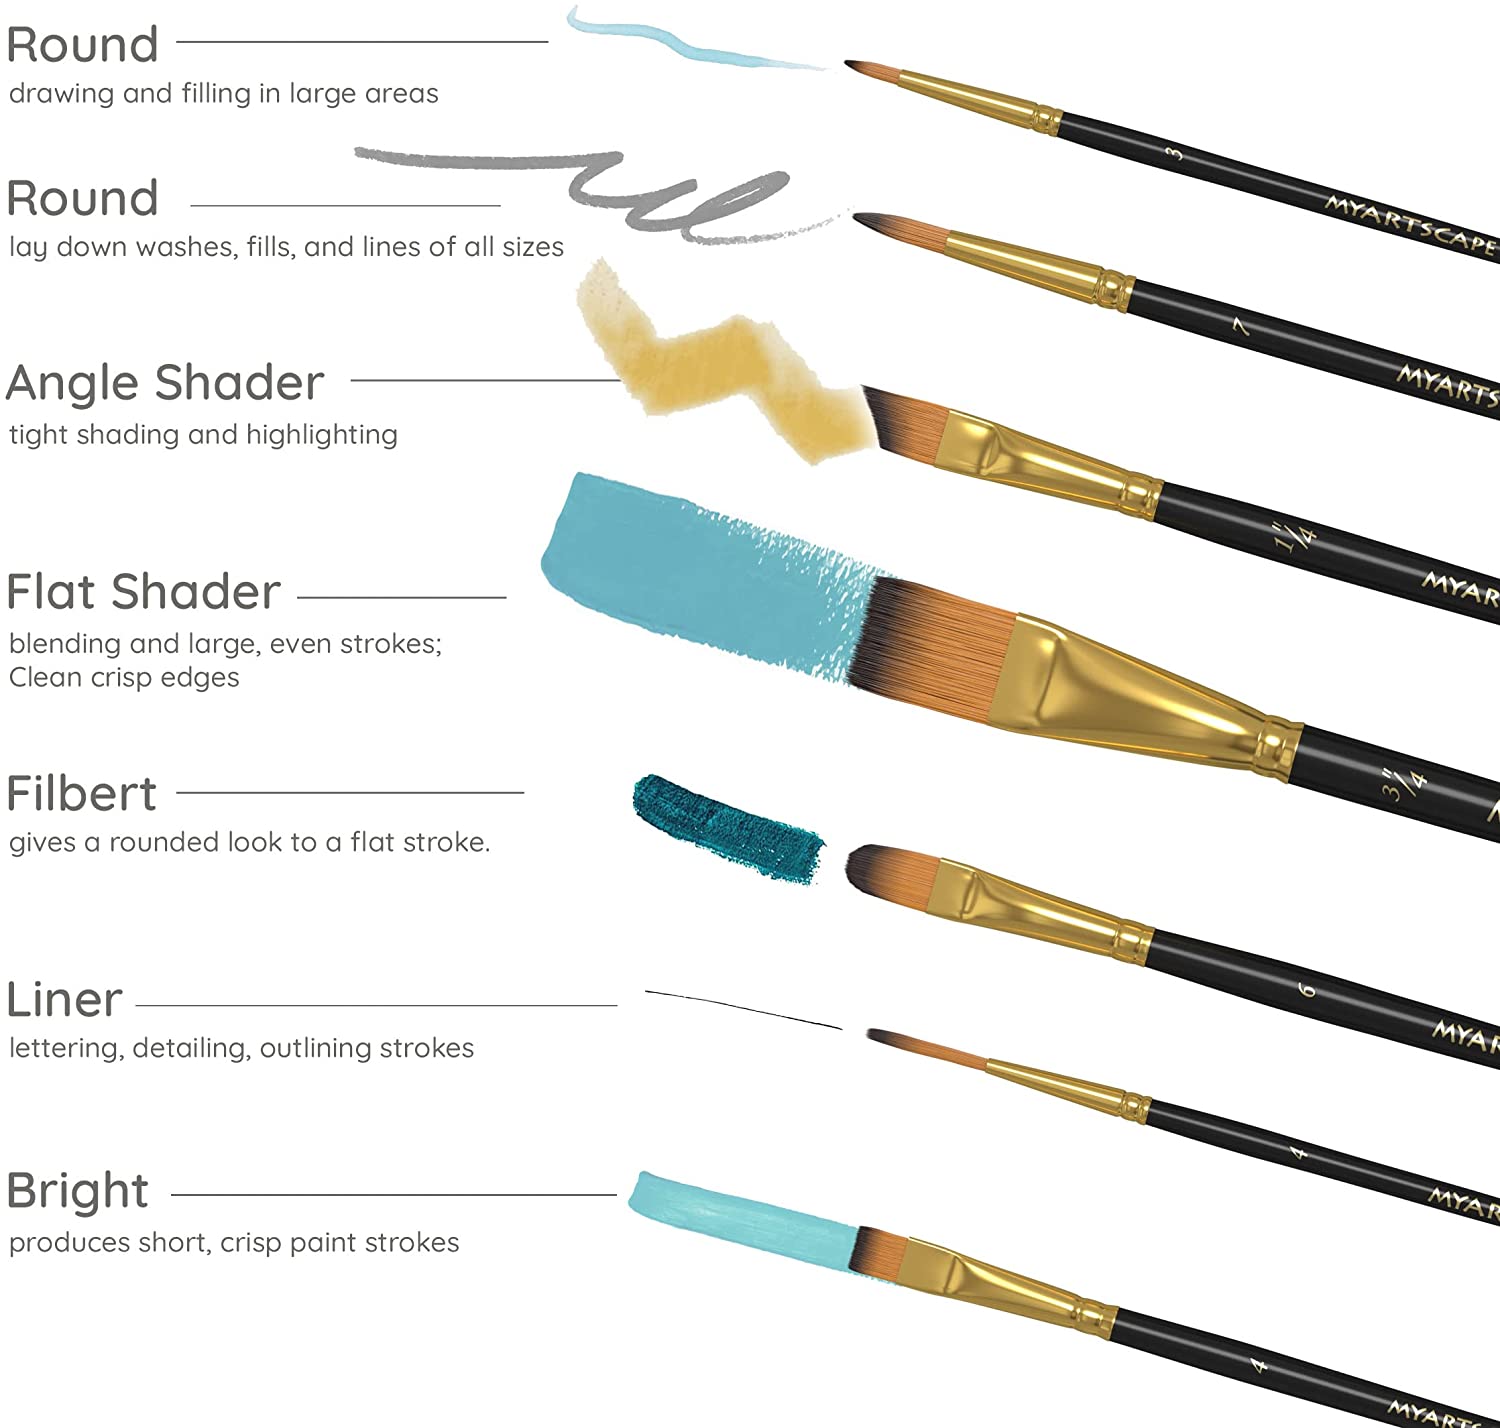 LorDac Arts Paint Brush Set, 7 Artist Brushes for Painting with